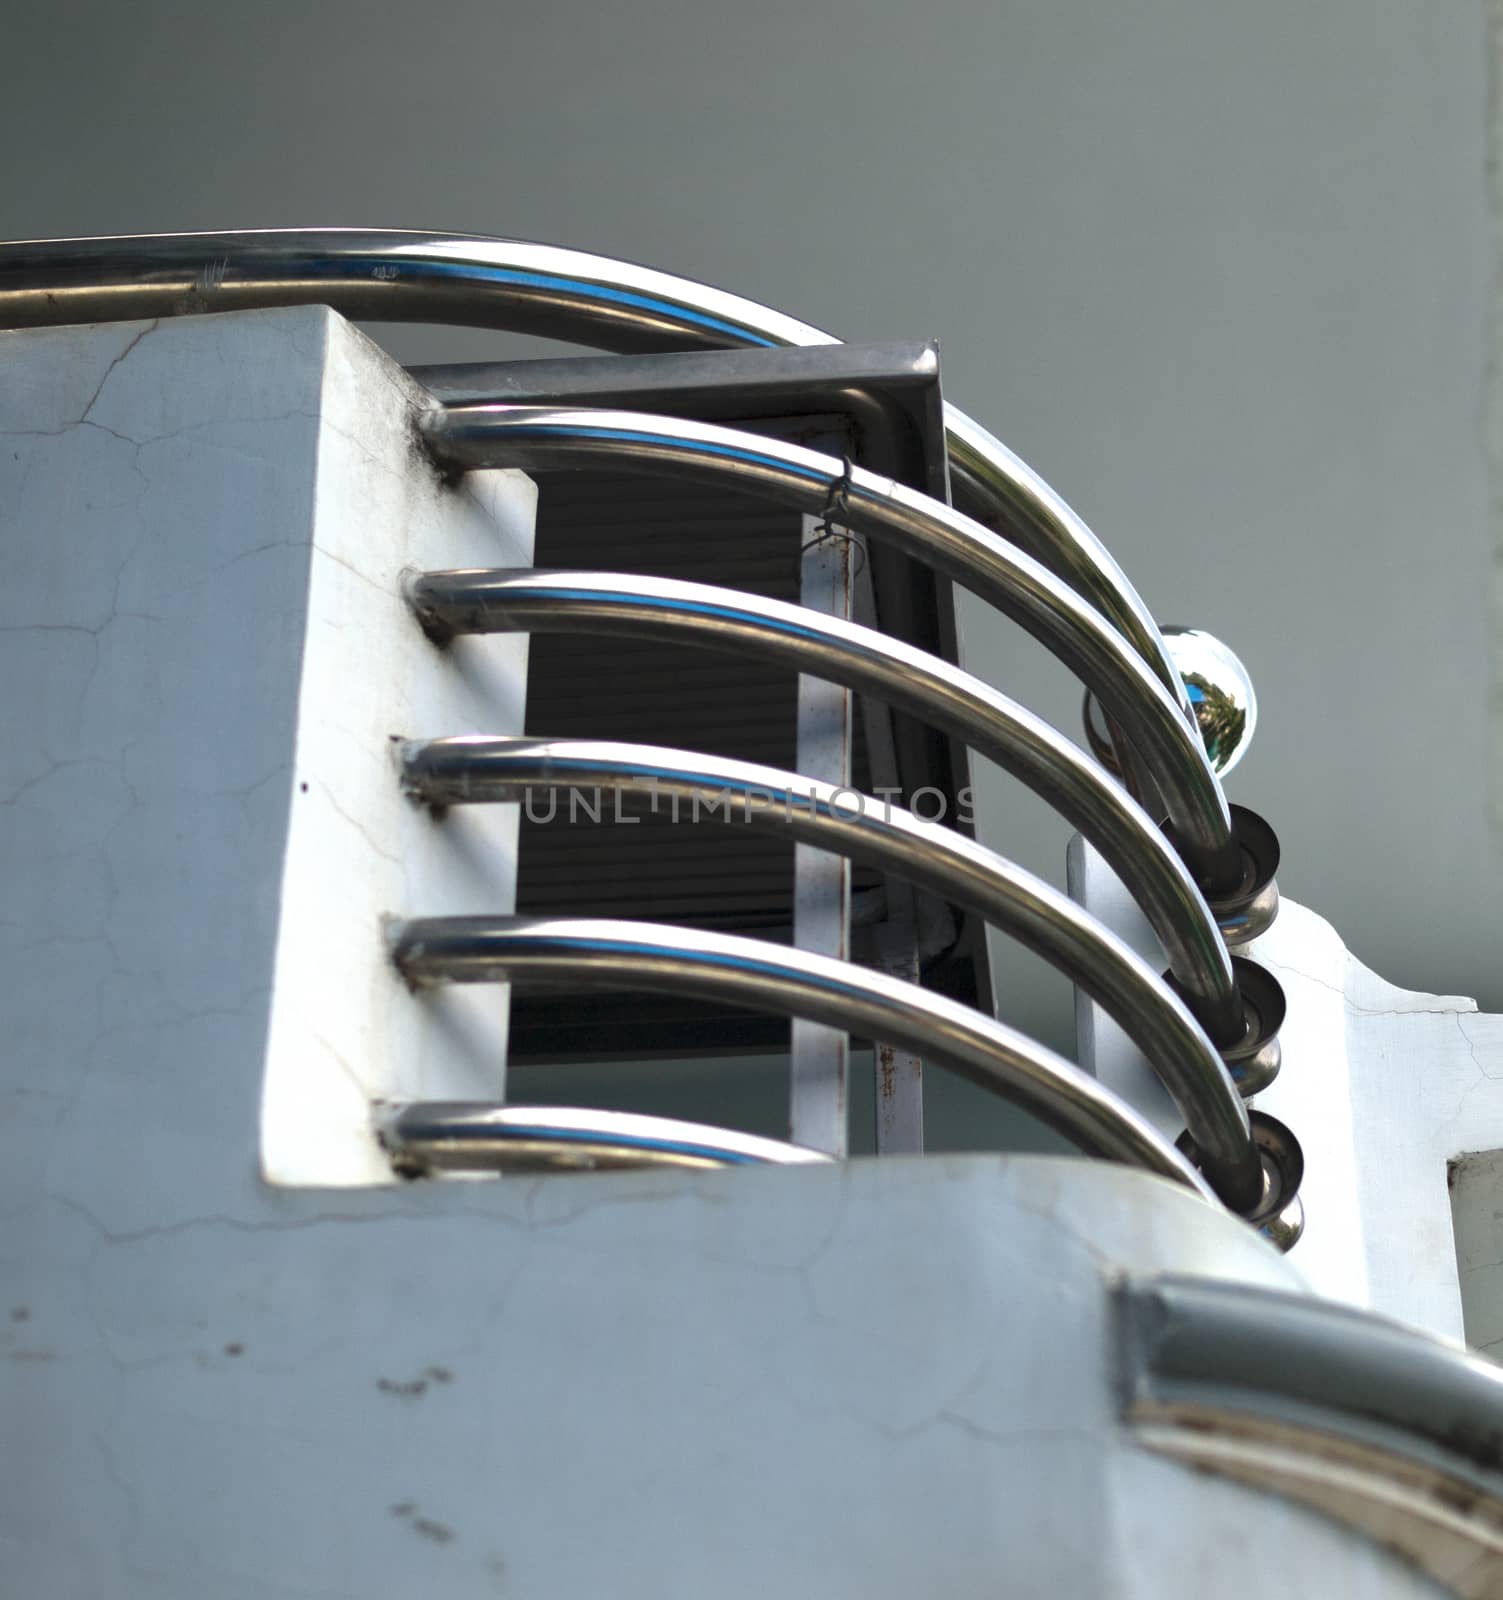 COLOR PHOTO OF CURVING STAINLESS STEEL HANDRAIL